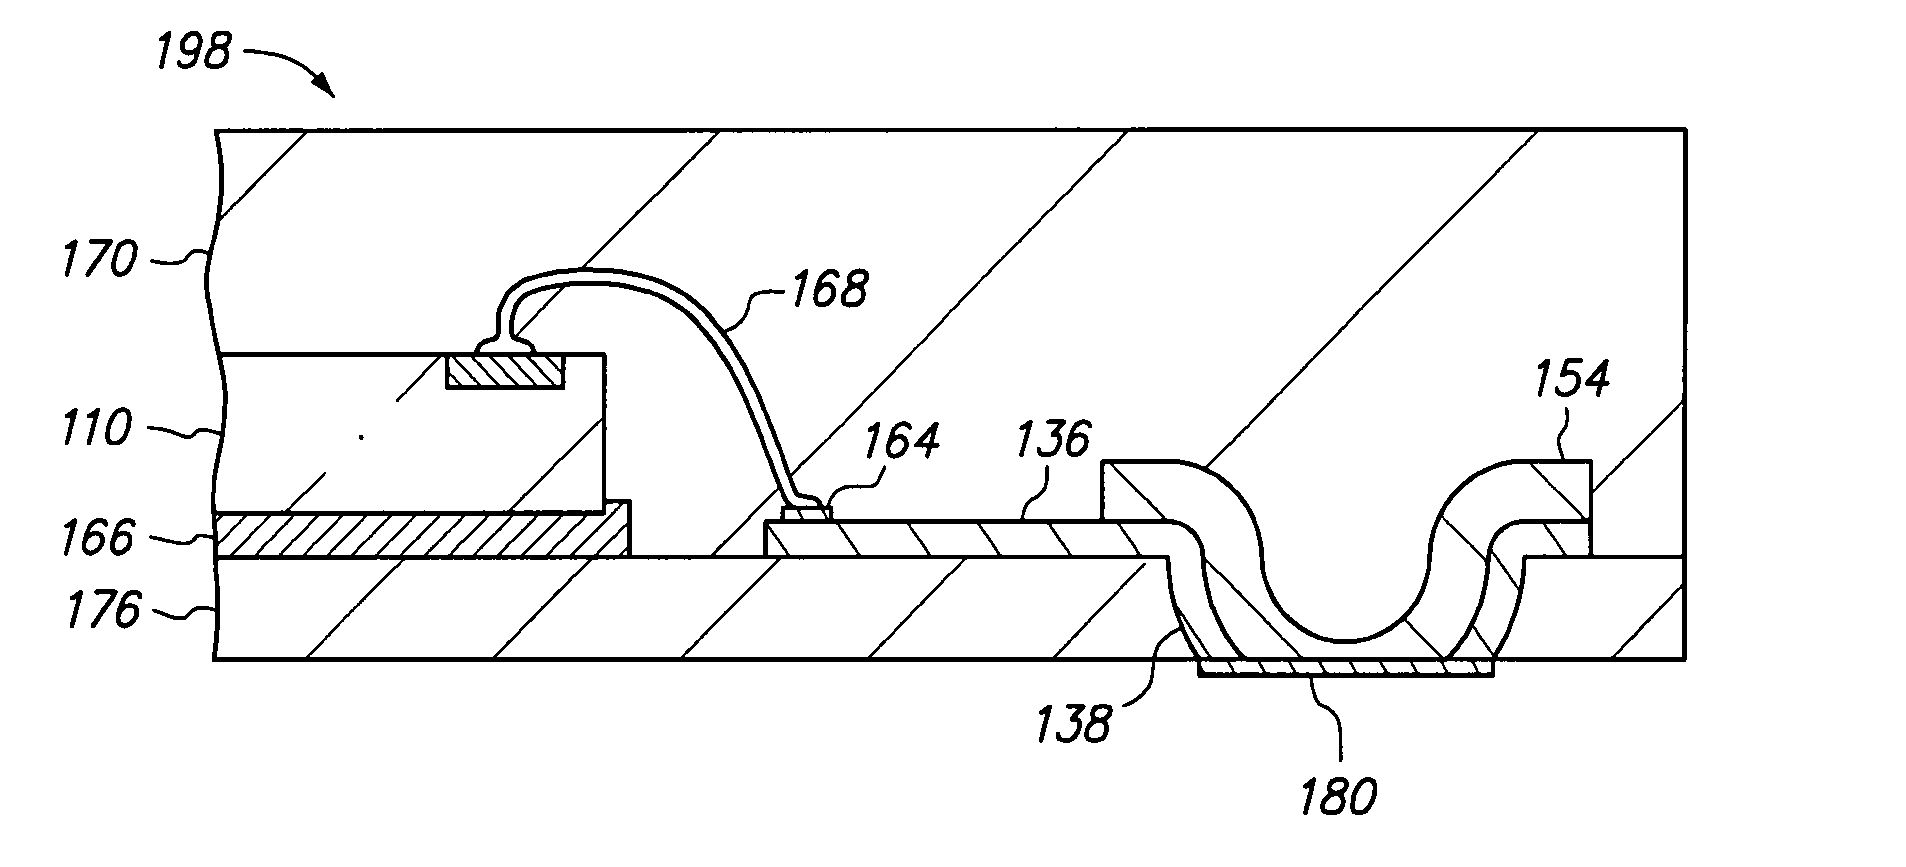 Method of making a semiconductor chip assembly with a bumped terminal, a filler and an insulative base